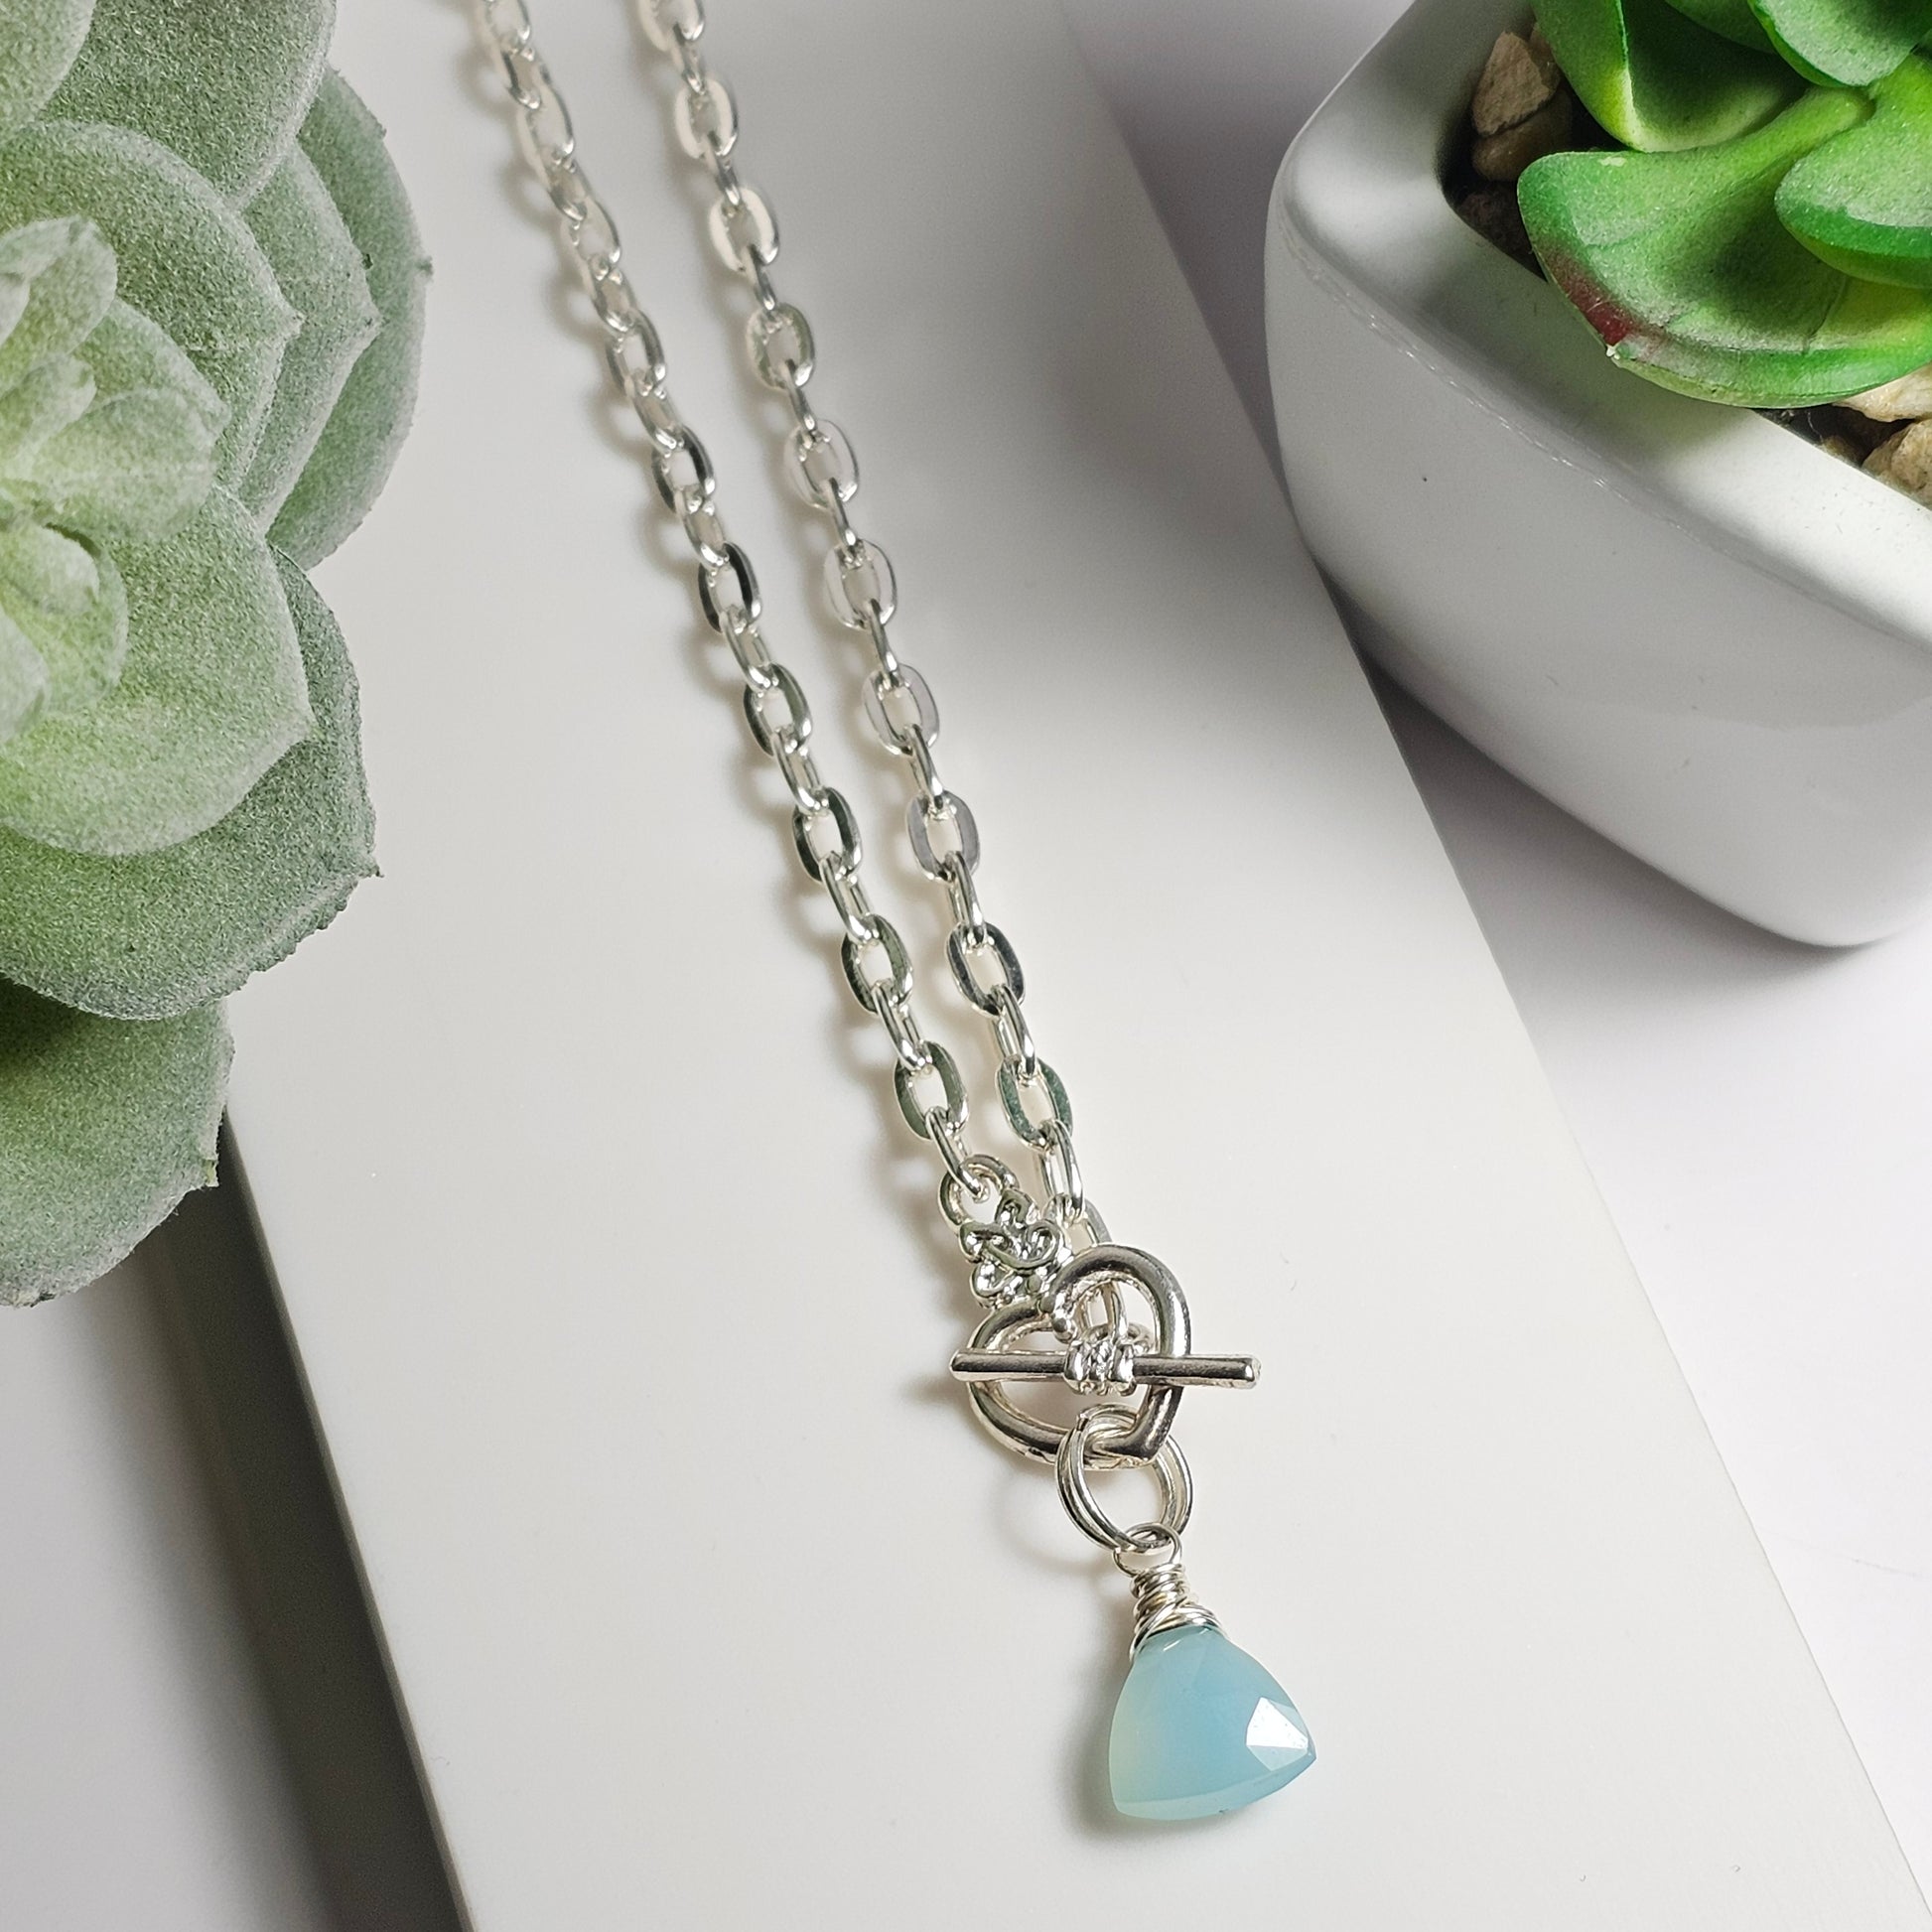 'Clasp the heart' necklace | A wire wrapped stunning Blue Chalcedony bead suspended from a silver toned heart clasp and fastened to a iron paperclip chain. Necklace length: 45cm focal drop length: 2cm